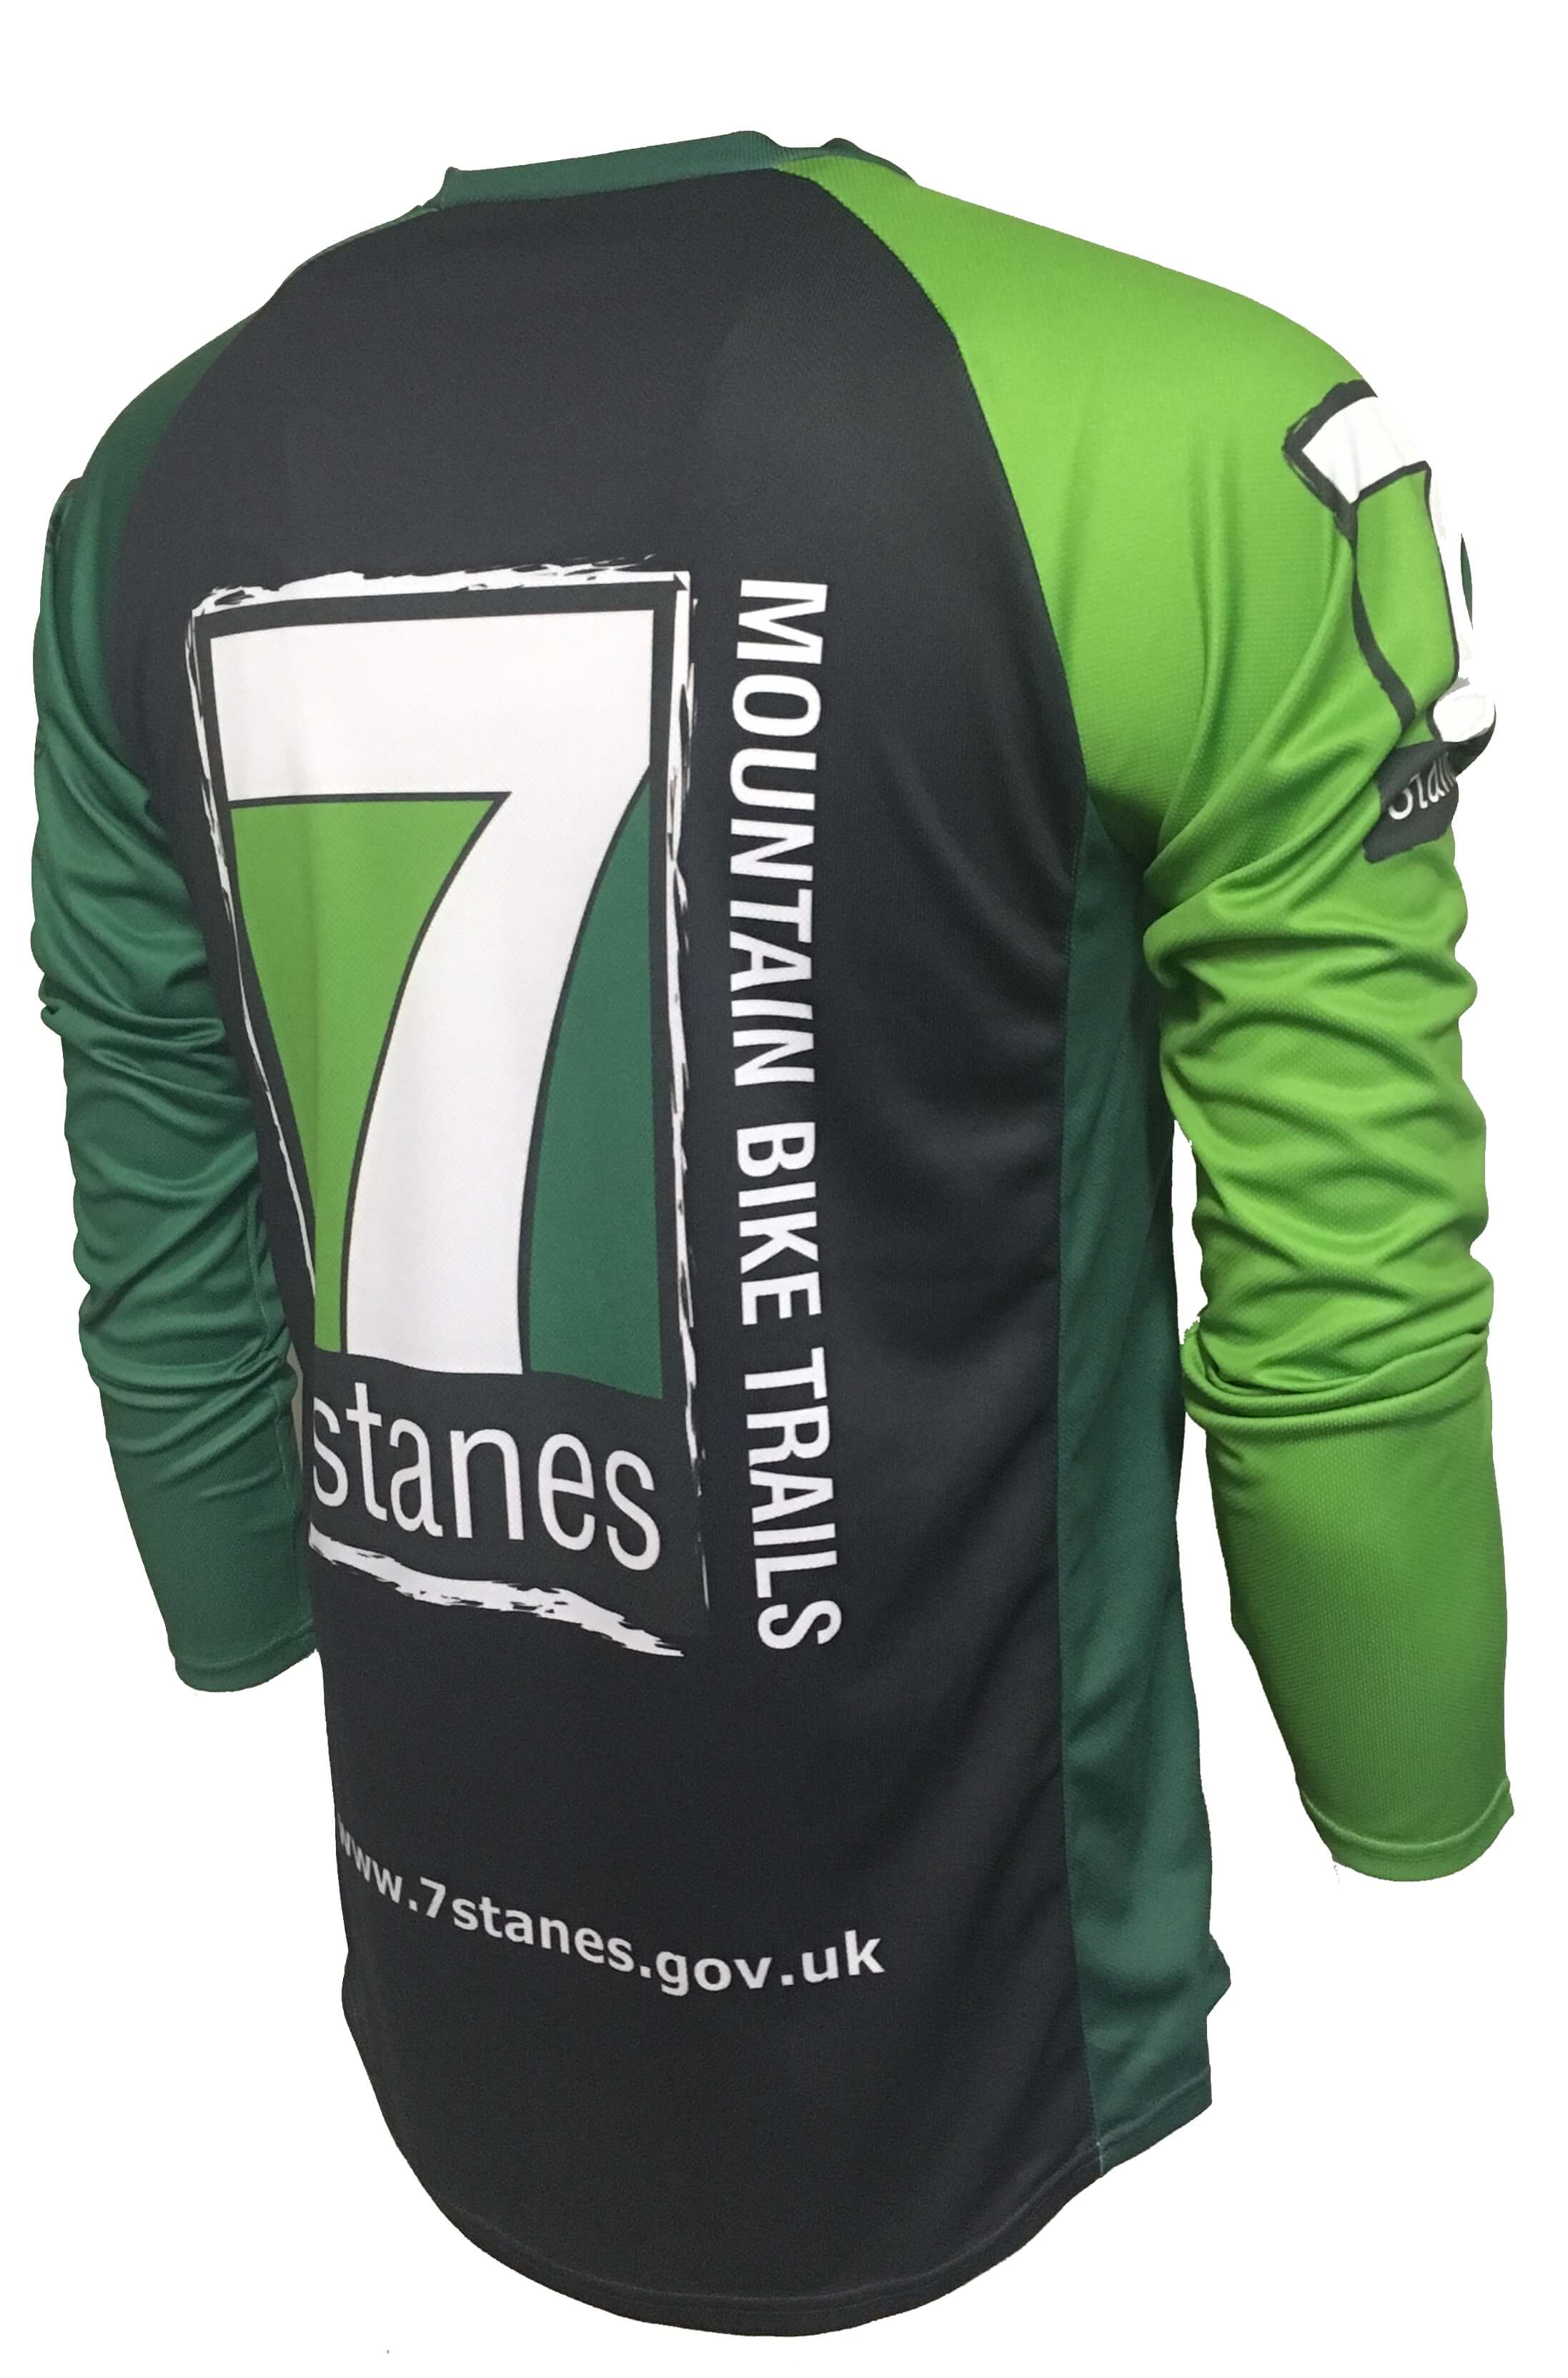 7stanes Enduro Cycling Jersey Back